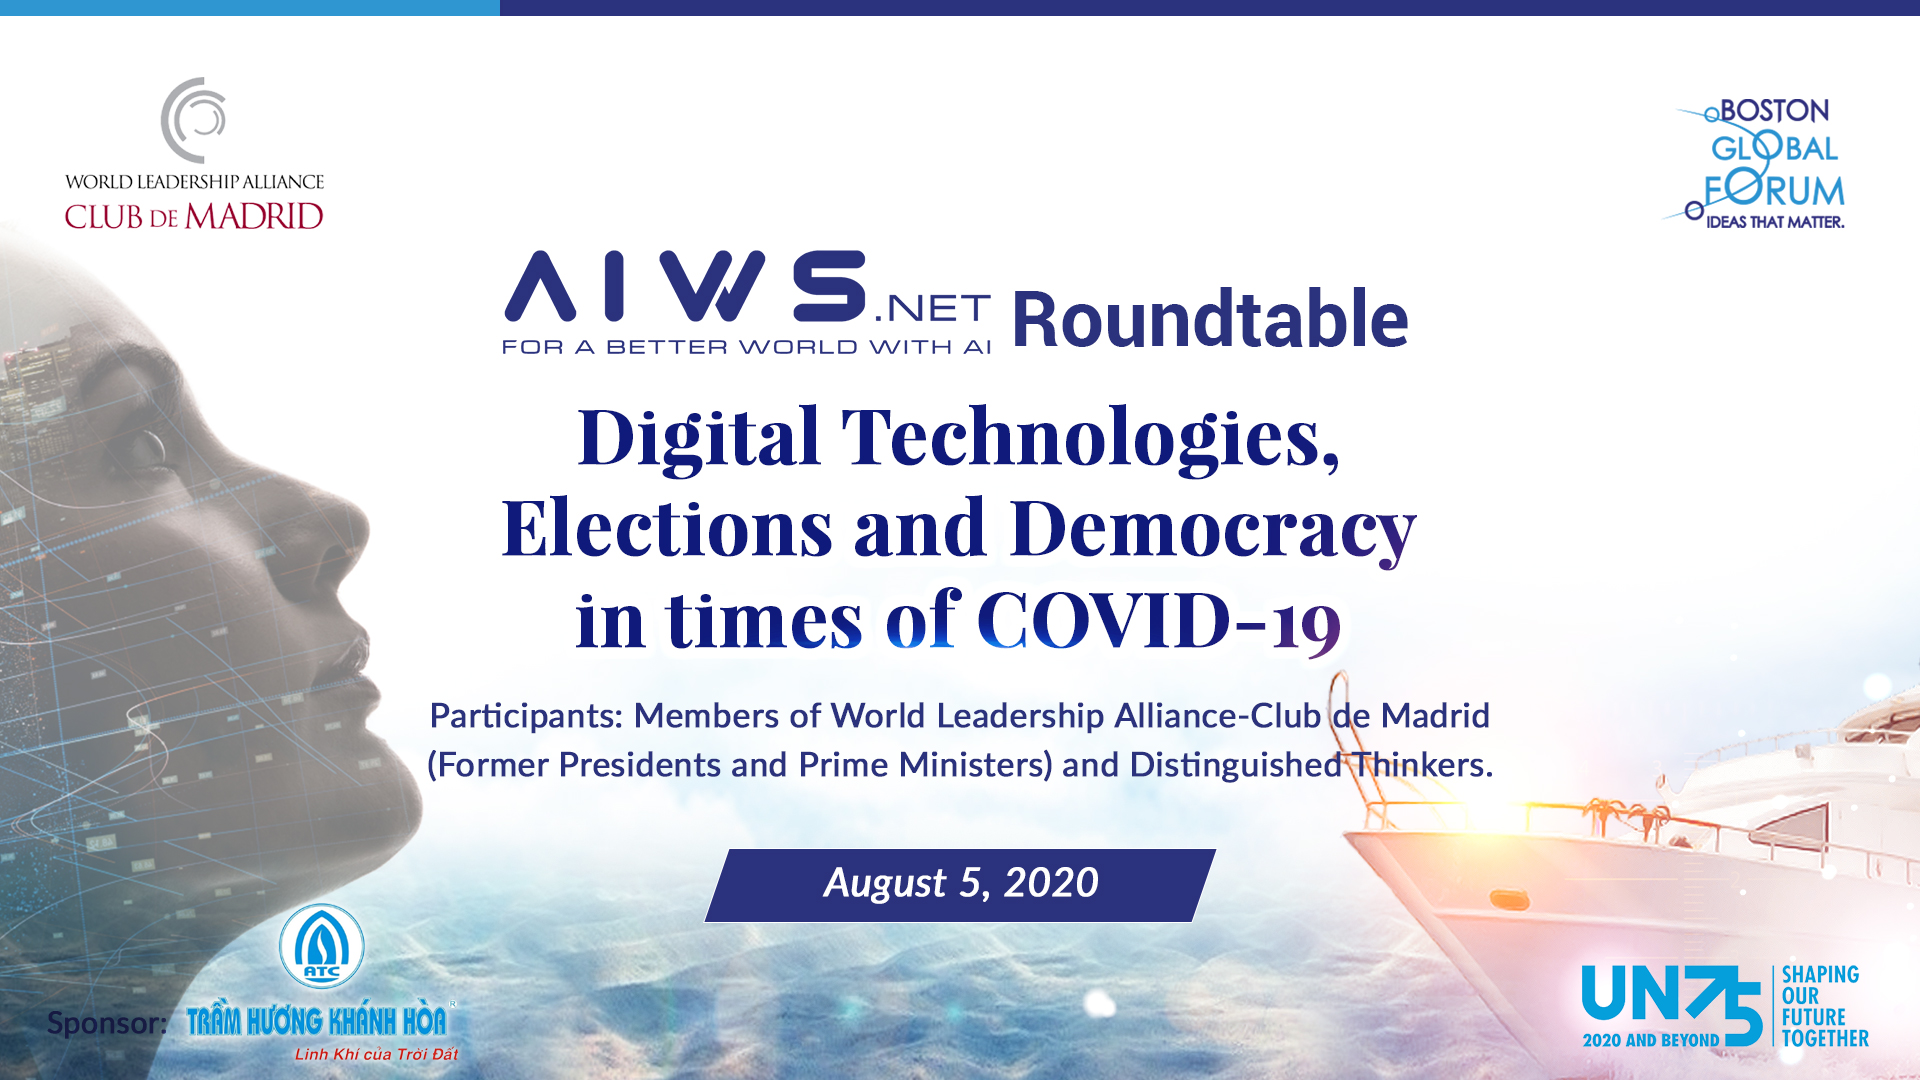 World Leadership Alliance-Club de Madrid and the Boston Global Forum co-organize Online AIWS Roundtable on Digital Technologies, Elections and Democracy in times of COVID-19